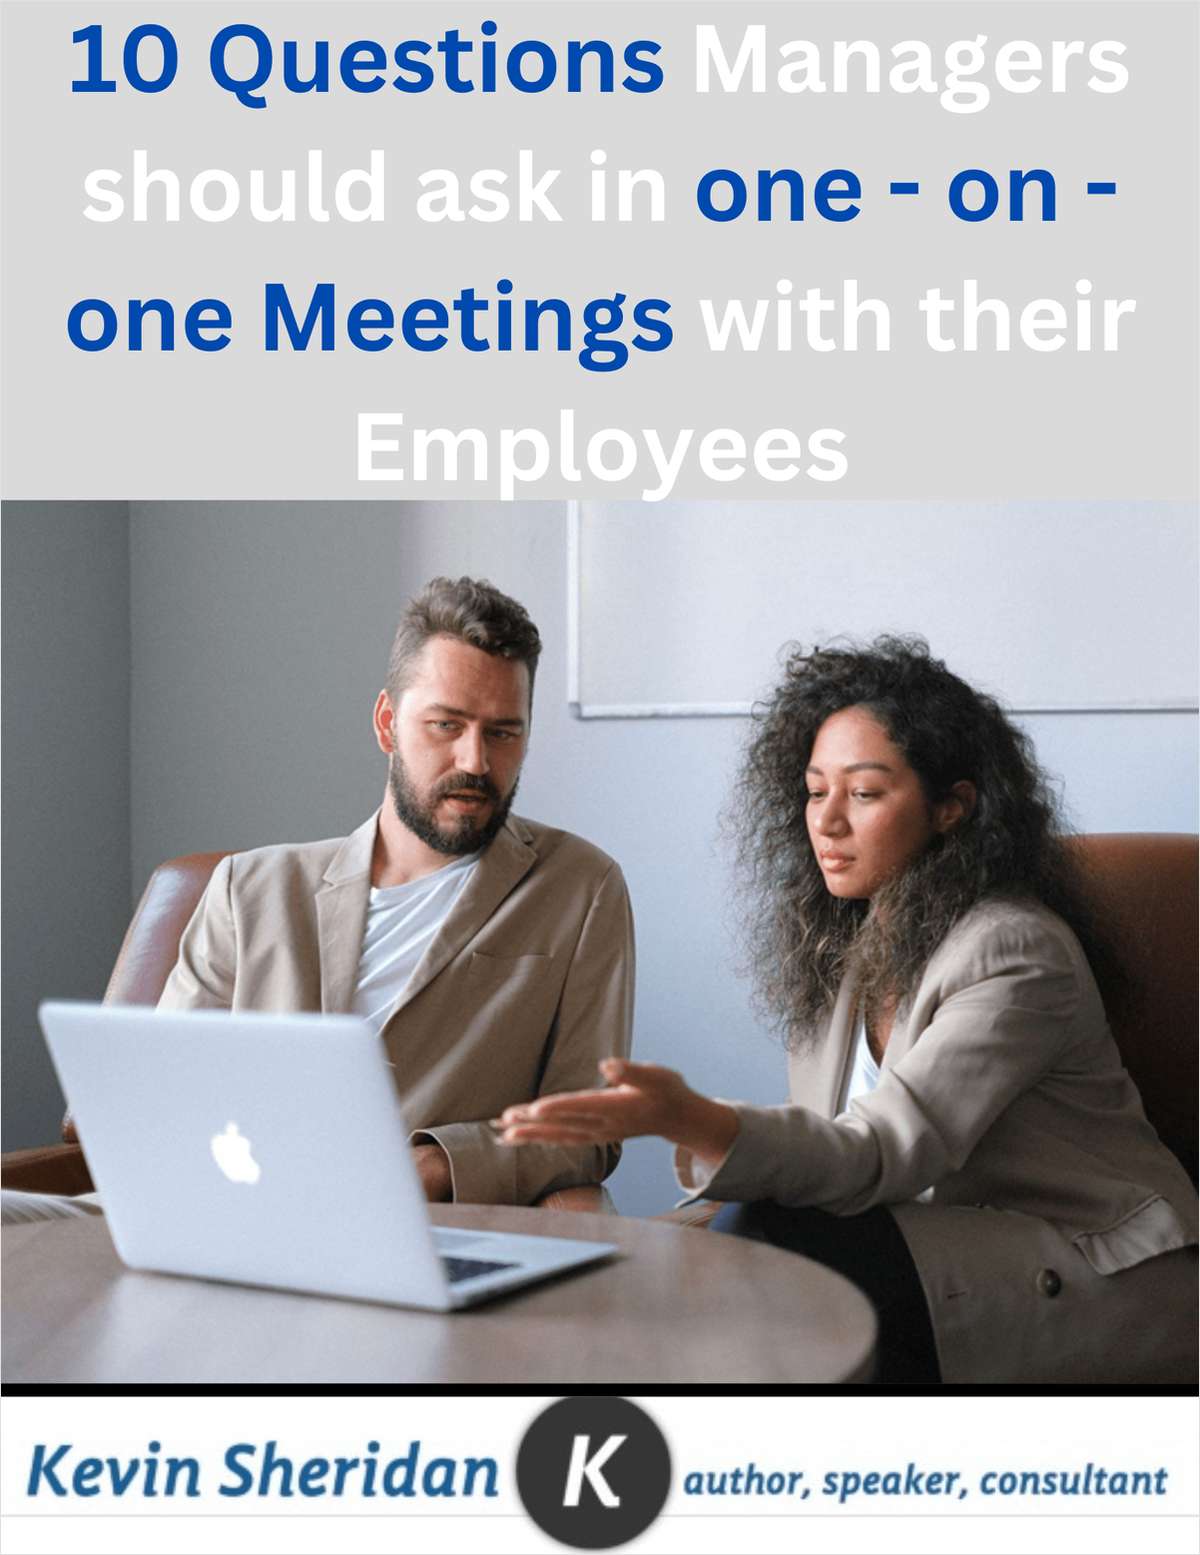 10 Questions Managers Should Ask In One-On-One Meetings With Their Employees.